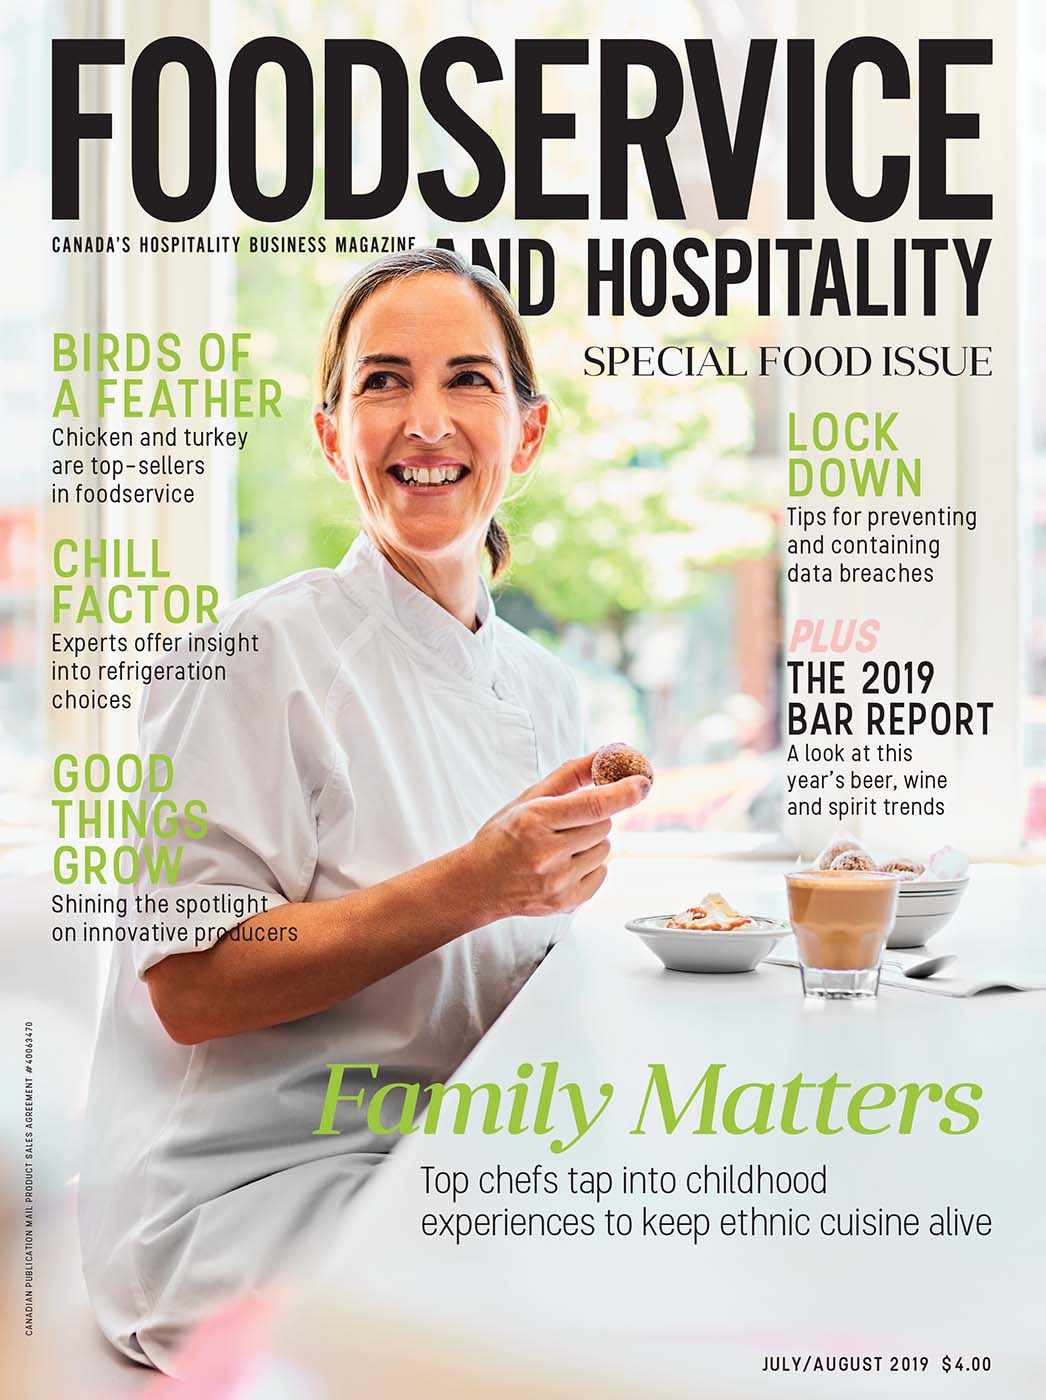 Editorial photography for Fooservice & Hospitality Magazine